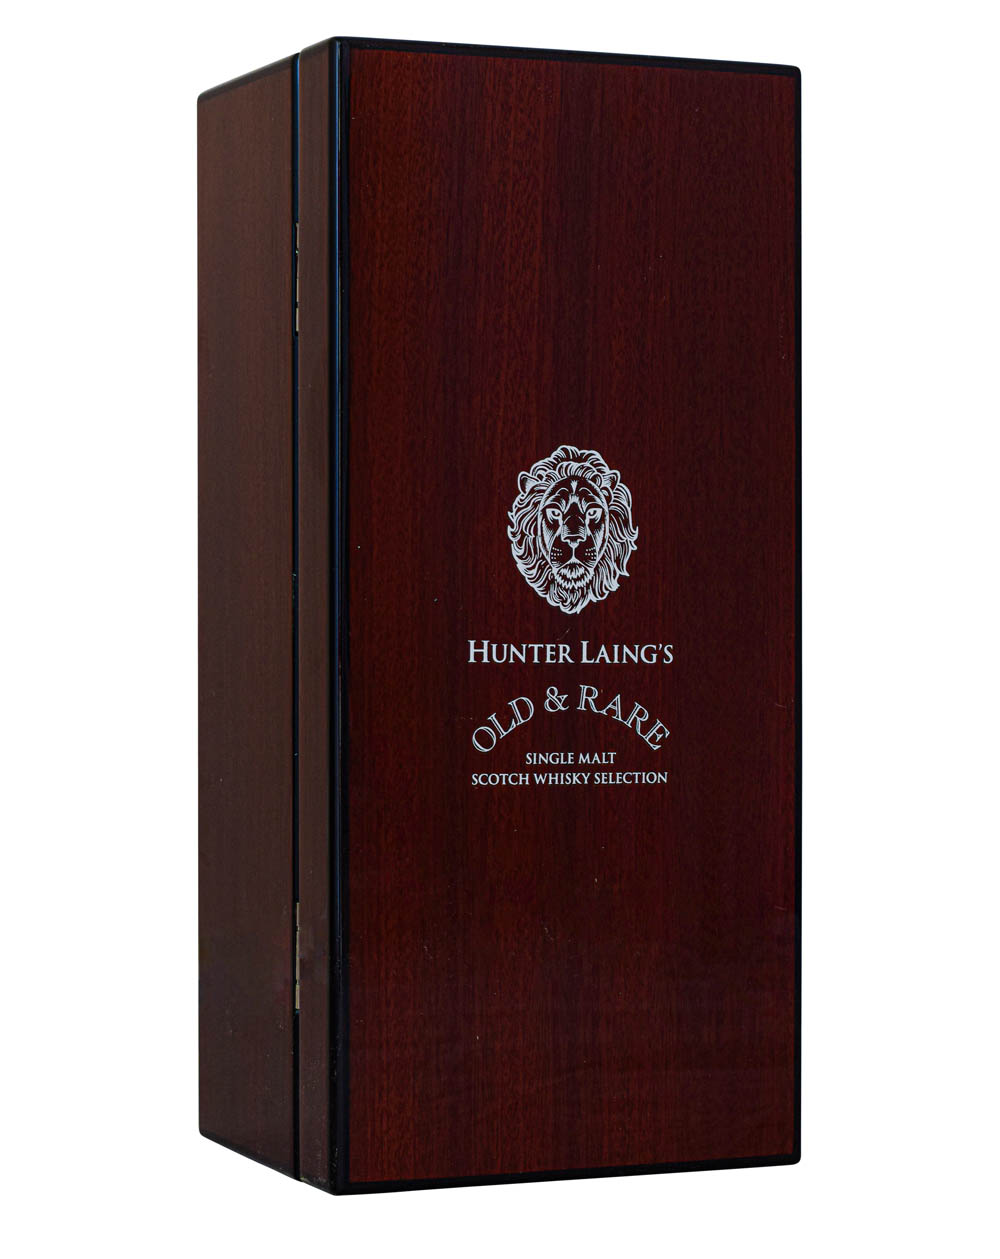 Hunter Laing Old & Rare Series Box Musthave Malts MHM